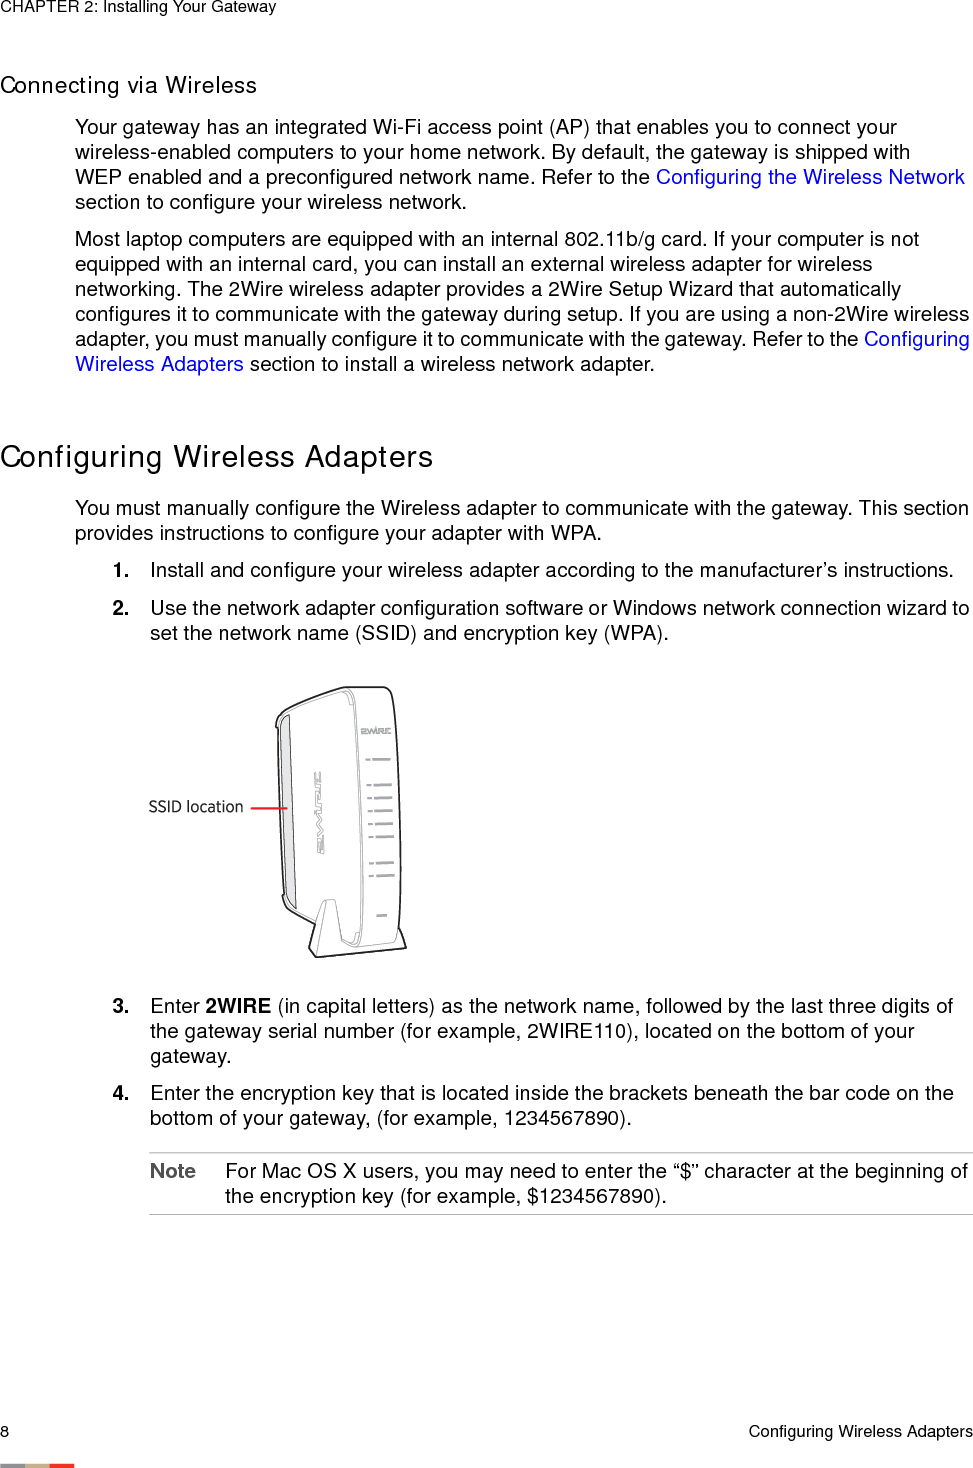 CHAPTER 2: Installing Your Gateway8Configuring Wireless AdaptersConnecting via Wireless Your gateway has an integrated Wi-Fi access point (AP) that enables you to connect your wireless-enabled computers to your home network. By default, the gateway is shipped with WEP enabled and a preconfigured network name. Refer to the Configuring the Wireless Network section to configure your wireless network. Most laptop computers are equipped with an internal 802.11b/g card. If your computer is not equipped with an internal card, you can install an external wireless adapter for wireless networking. The 2Wire wireless adapter provides a 2Wire Setup Wizard that automatically configures it to communicate with the gateway during setup. If you are using a non-2Wire wireless adapter, you must manually configure it to communicate with the gateway. Refer to the Configuring Wireless Adapters section to install a wireless network adapter. Configuring Wireless AdaptersYou must manually configure the Wireless adapter to communicate with the gateway. This section provides instructions to configure your adapter with WPA. 1. Install and configure your wireless adapter according to the manufacturer’s instructions.2. Use the network adapter configuration software or Windows network connection wizard to set the network name (SSID) and encryption key (WPA). 3. Enter 2WIRE (in capital letters) as the network name, followed by the last three digits of the gateway serial number (for example, 2WIRE110), located on the bottom of your gateway. 4. Enter the encryption key that is located inside the brackets beneath the bar code on the bottom of your gateway, (for example, 1234567890). Note For Mac OS X users, you may need to enter the “$” character at the beginning of the encryption key (for example, $1234567890). 